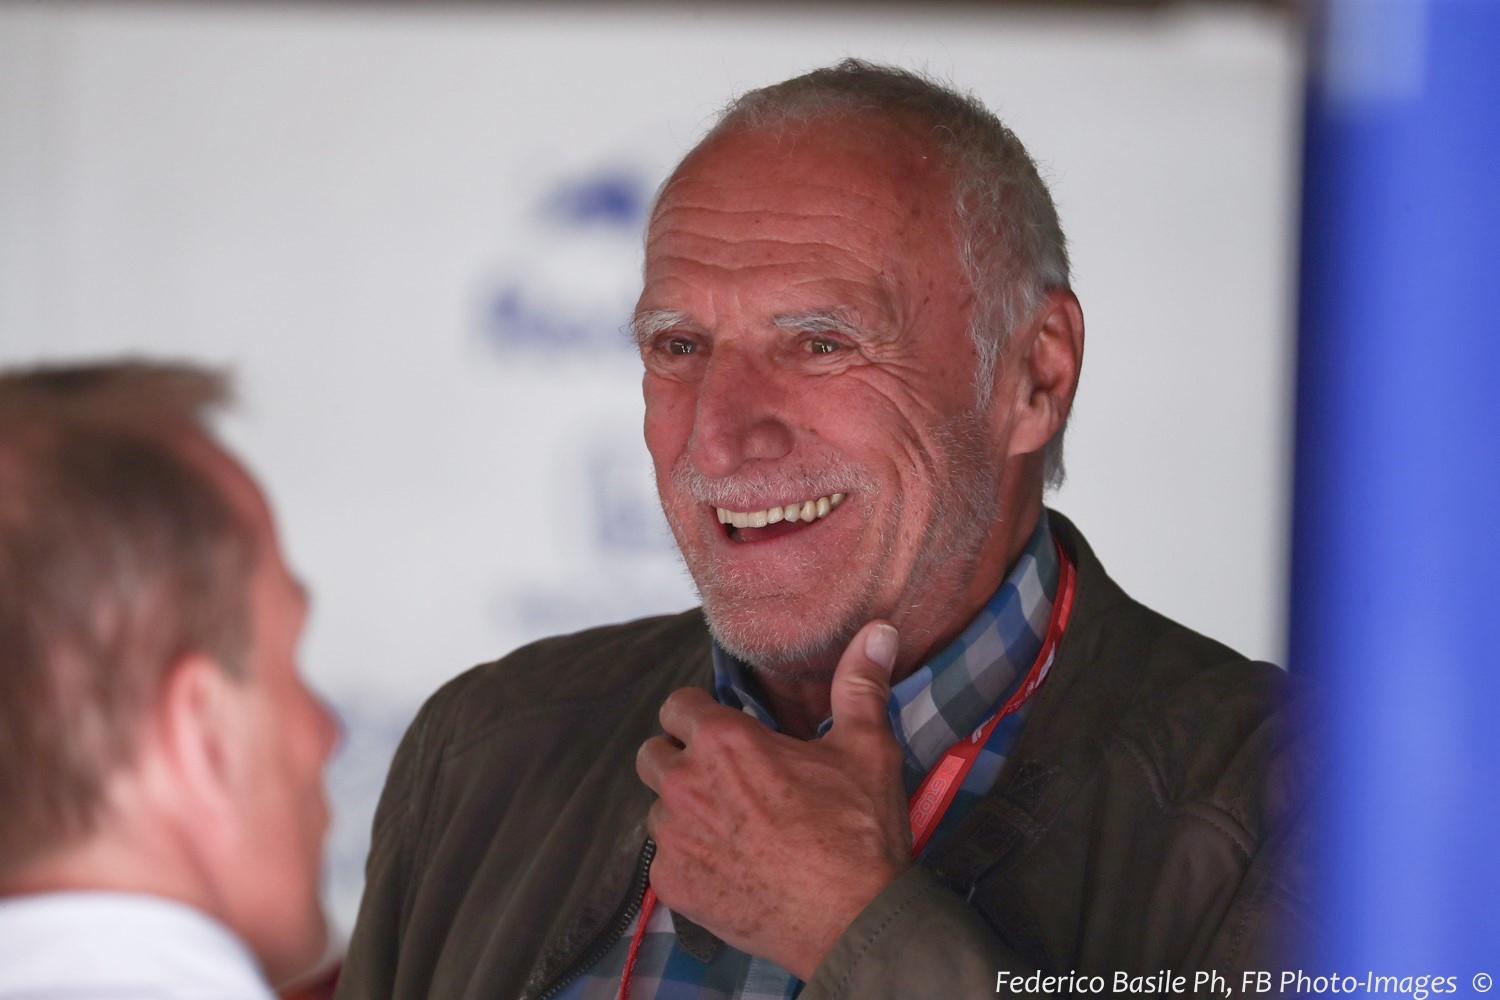 Dietrich Mateschitz onboard with cost reductions